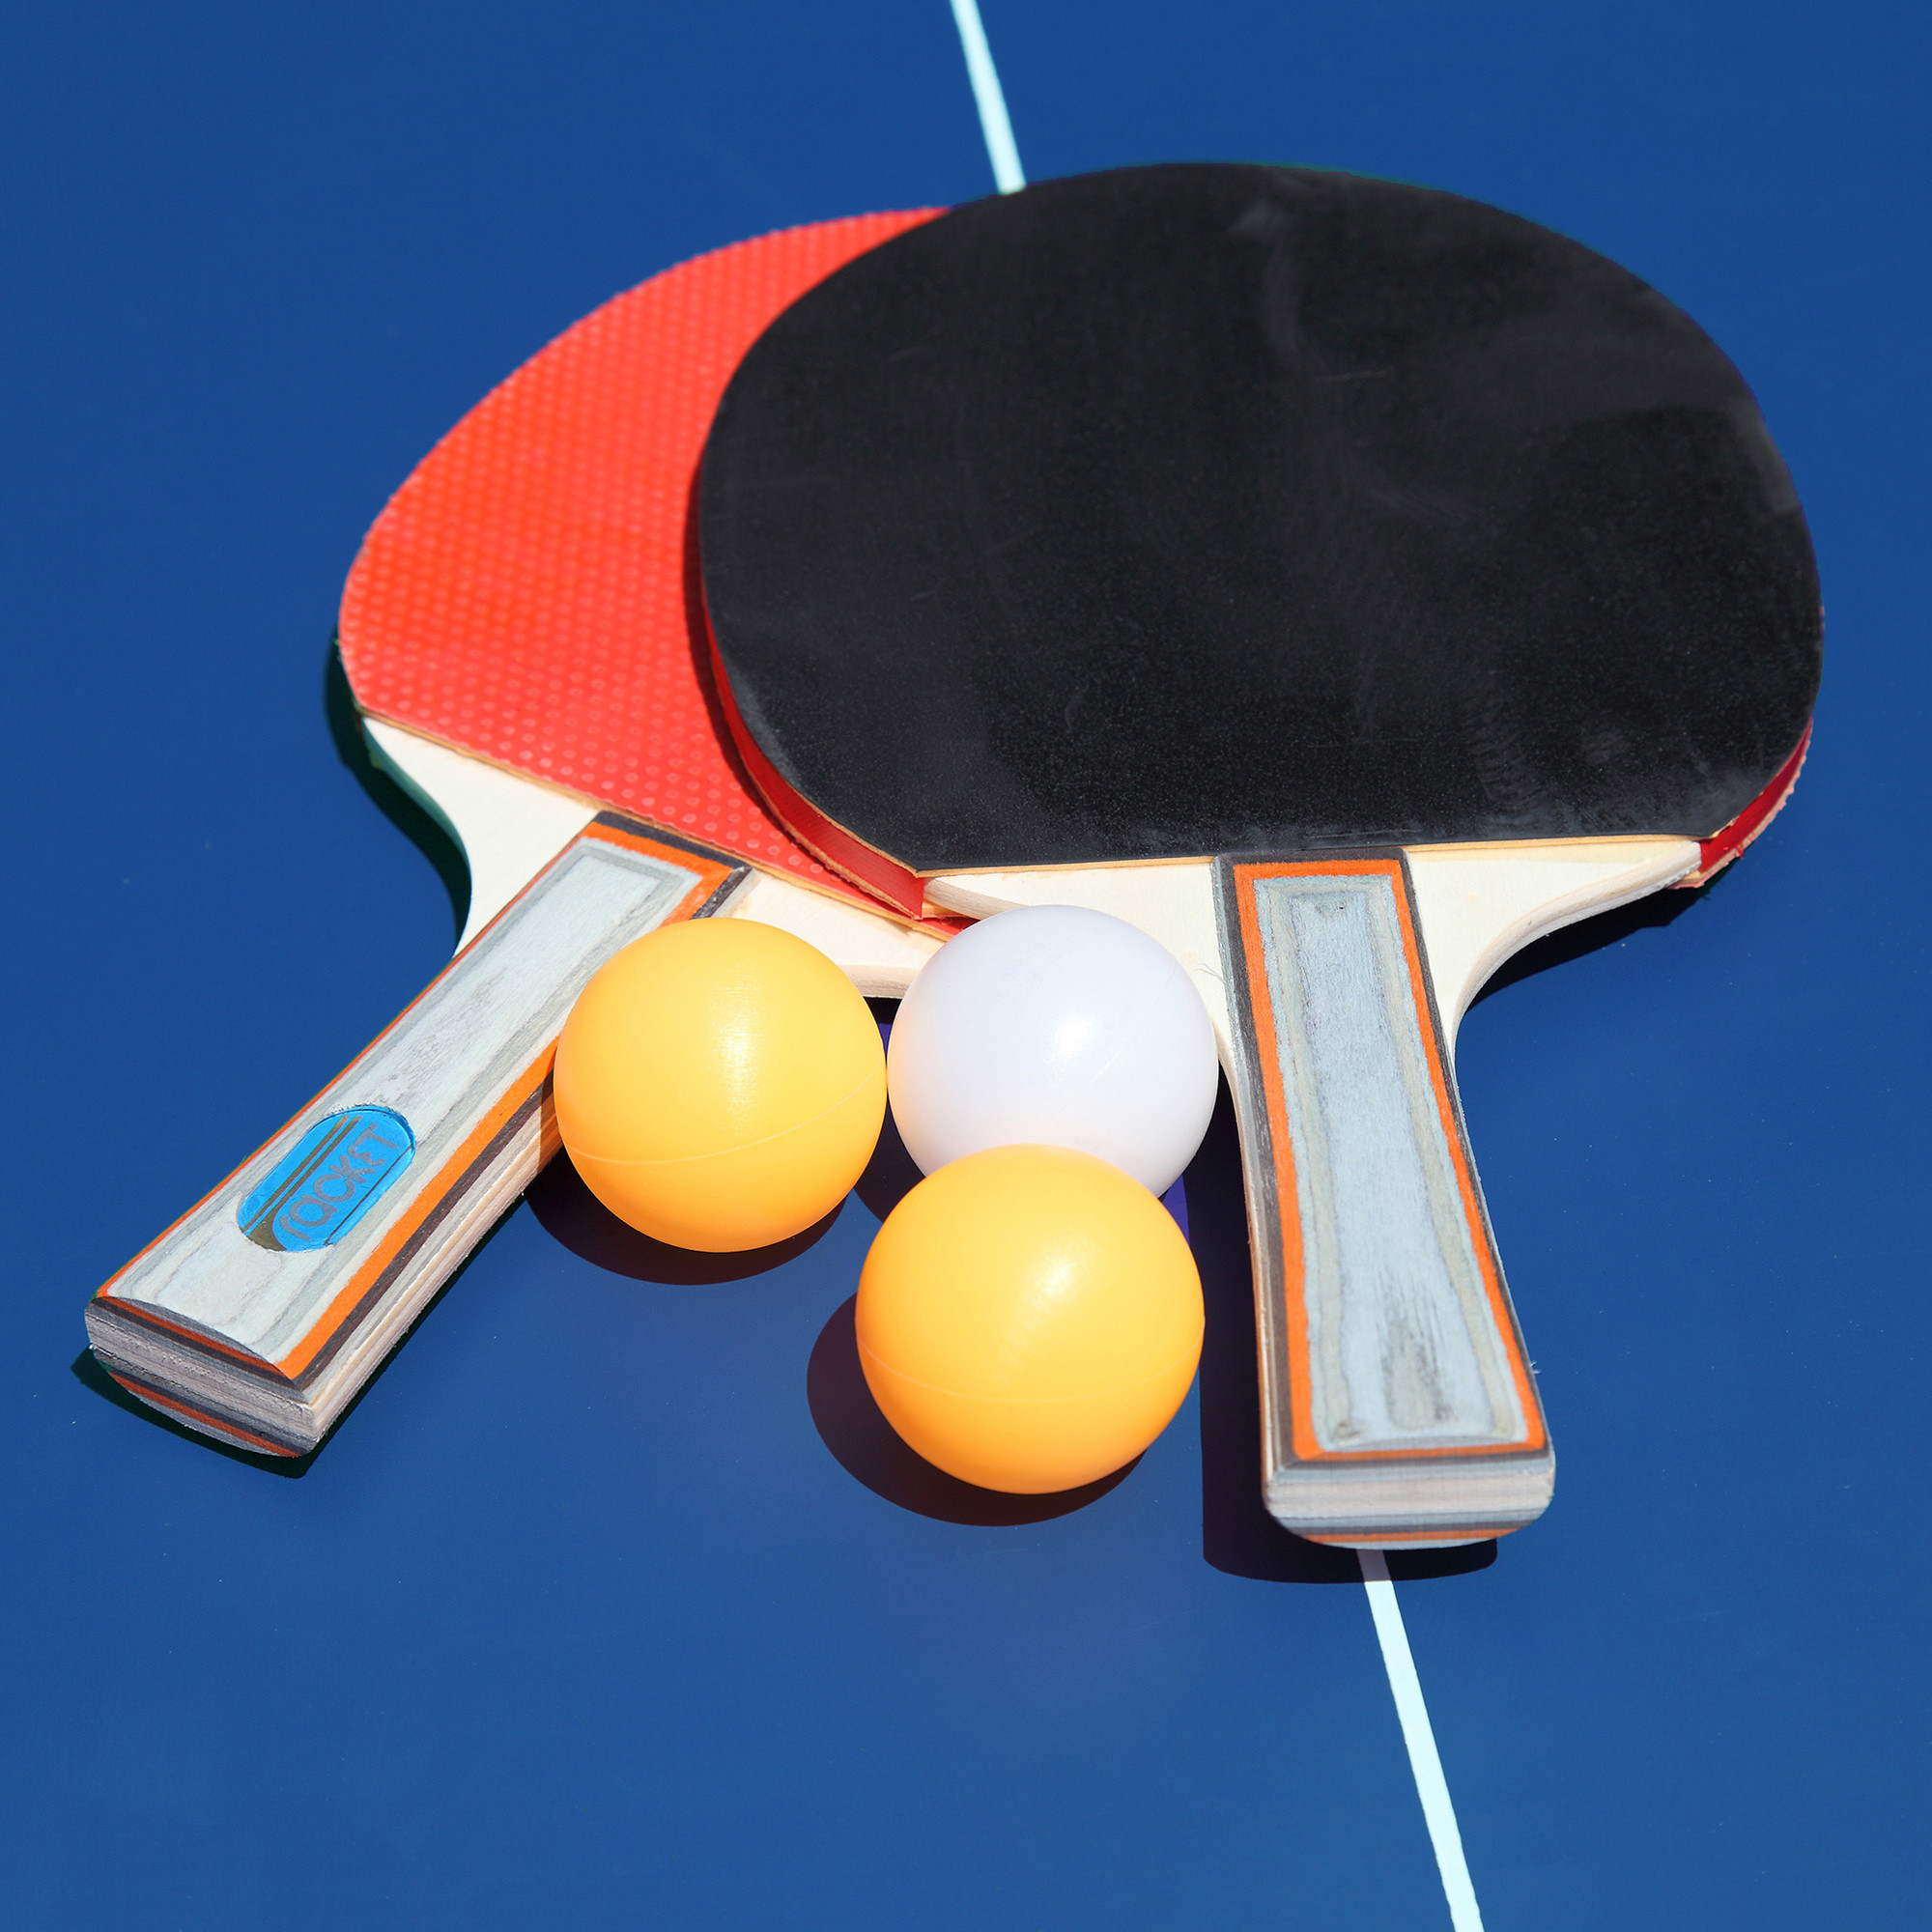 Hathaway Victory 25mm Table Tennis Table w/Two Carriage Transport, Blue - image 2 of 12